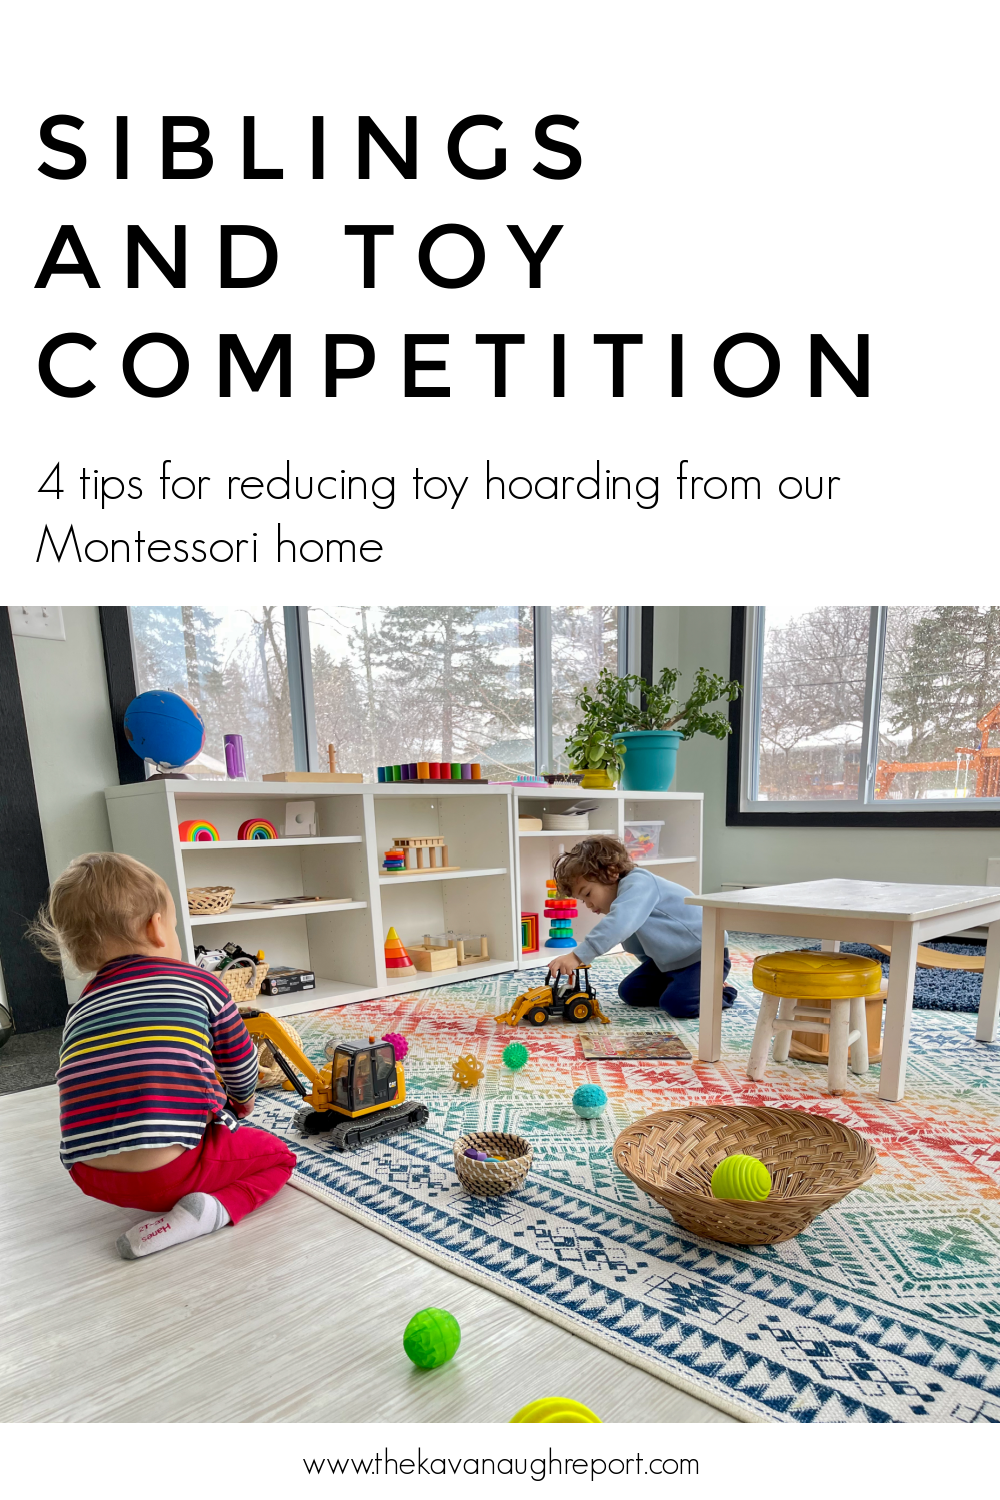 4 tips to help reduce or eliminate competition for toys in among siblings. These Montessori parenting tips help to promotes calm and cooperation